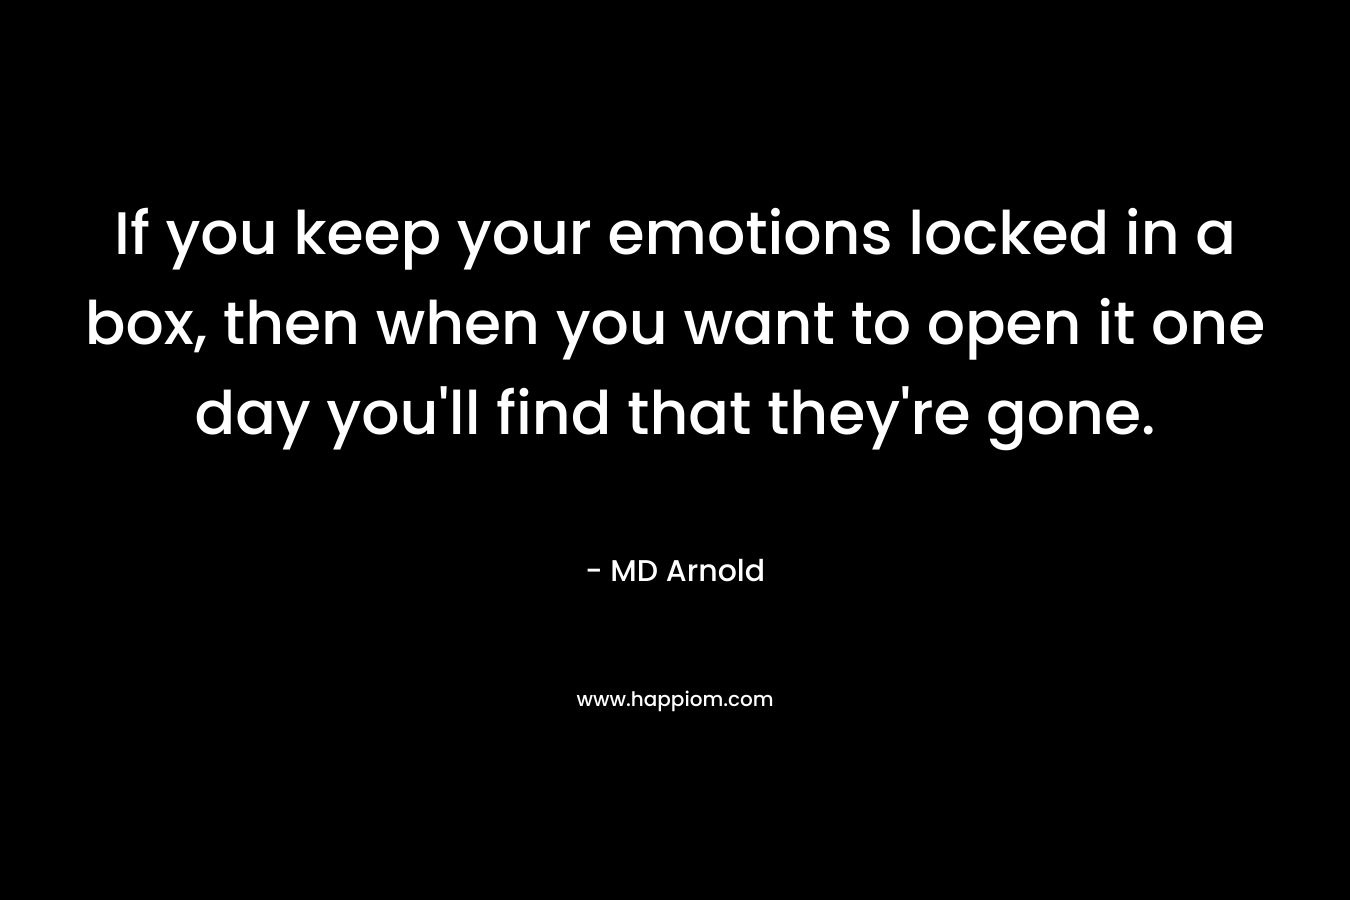 If you keep your emotions locked in a box, then when you want to open it one day you’ll find that they’re gone. – MD Arnold